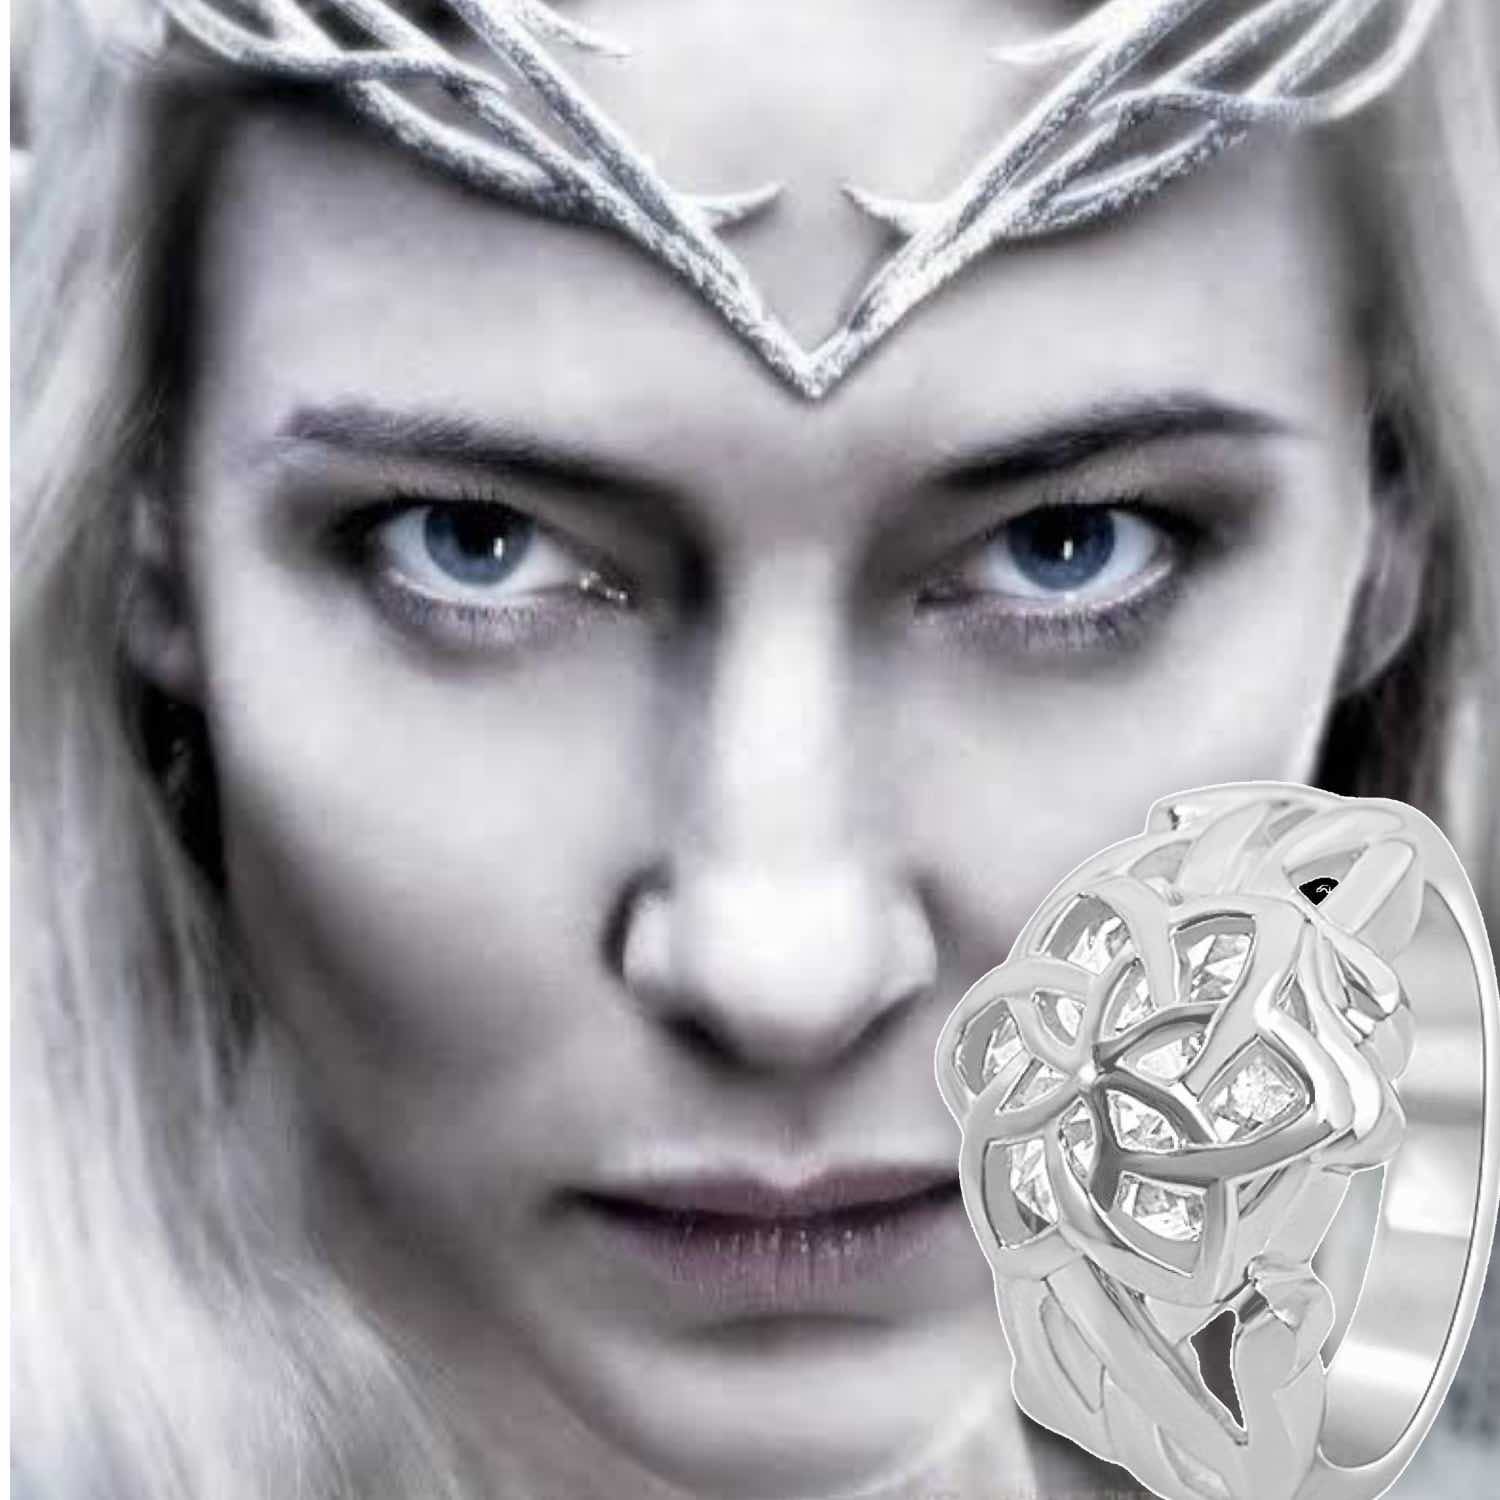 Get the Authentic and Official Galadriel's Nenya Water Ring and Flower Pendant Combo - a Must-Have for Any Lord of the Rings Fan